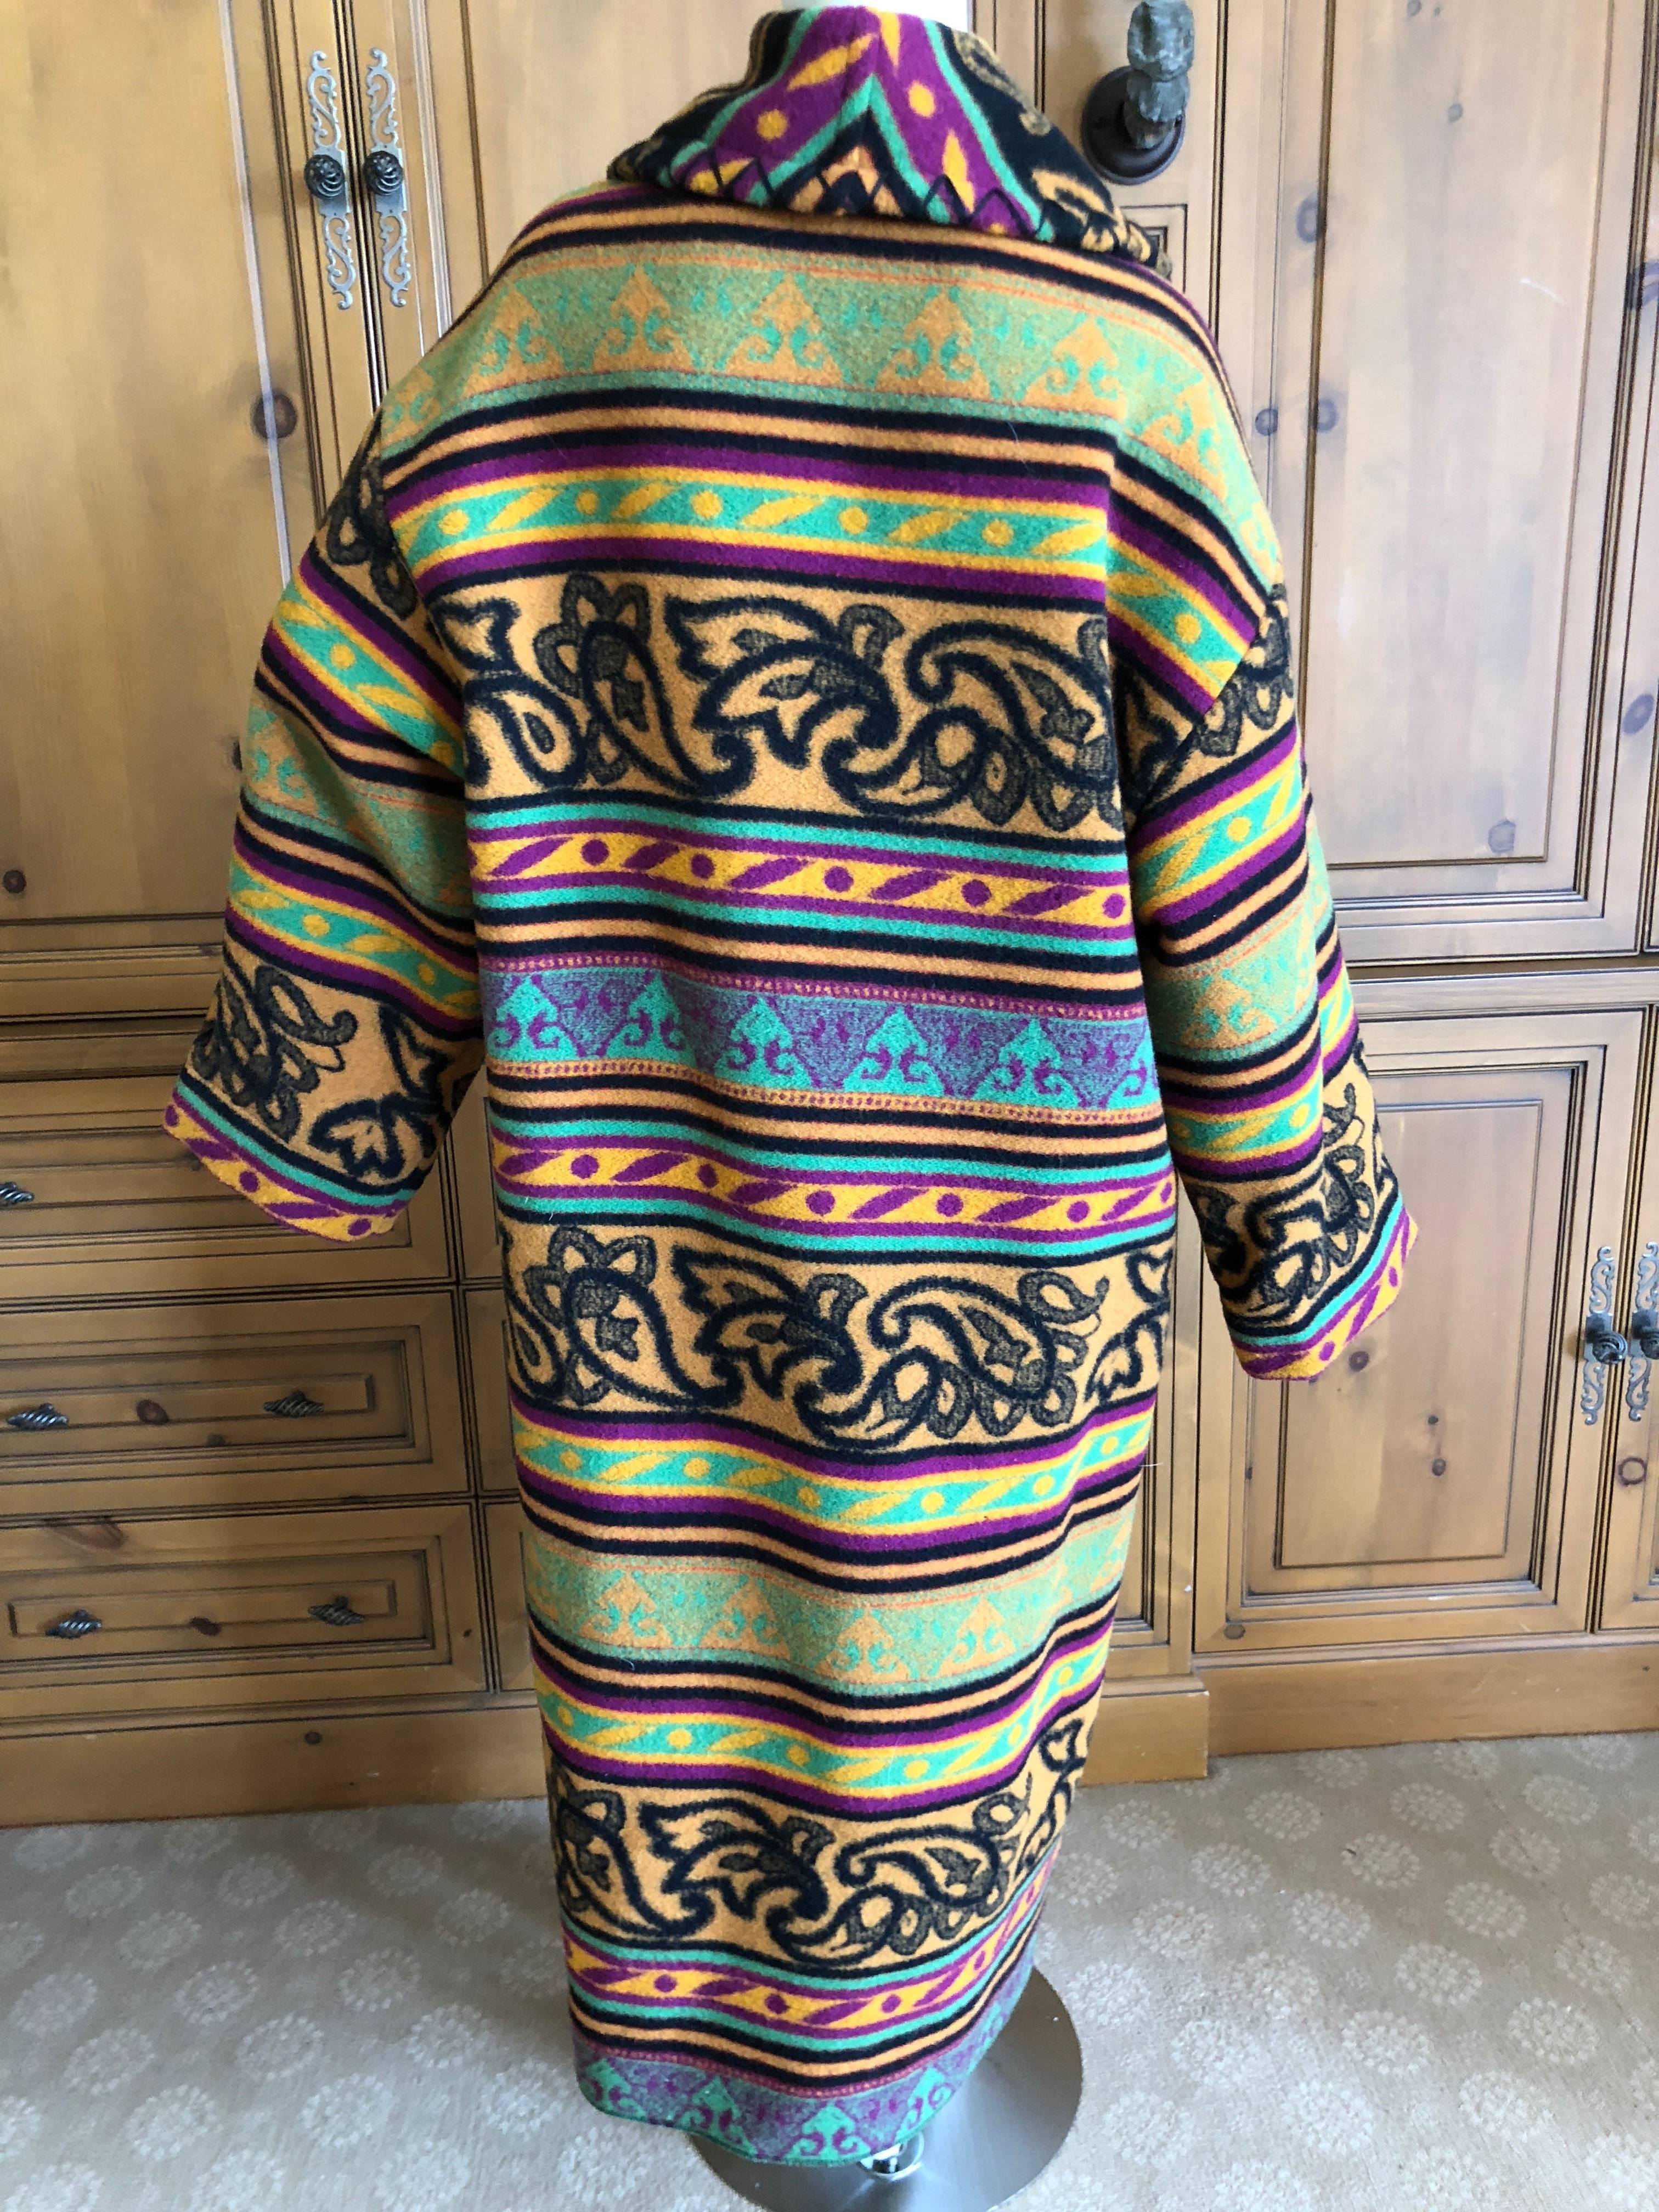 Byblos 1970's Blanket Coat by Gianni Versace In Excellent Condition For Sale In Cloverdale, CA